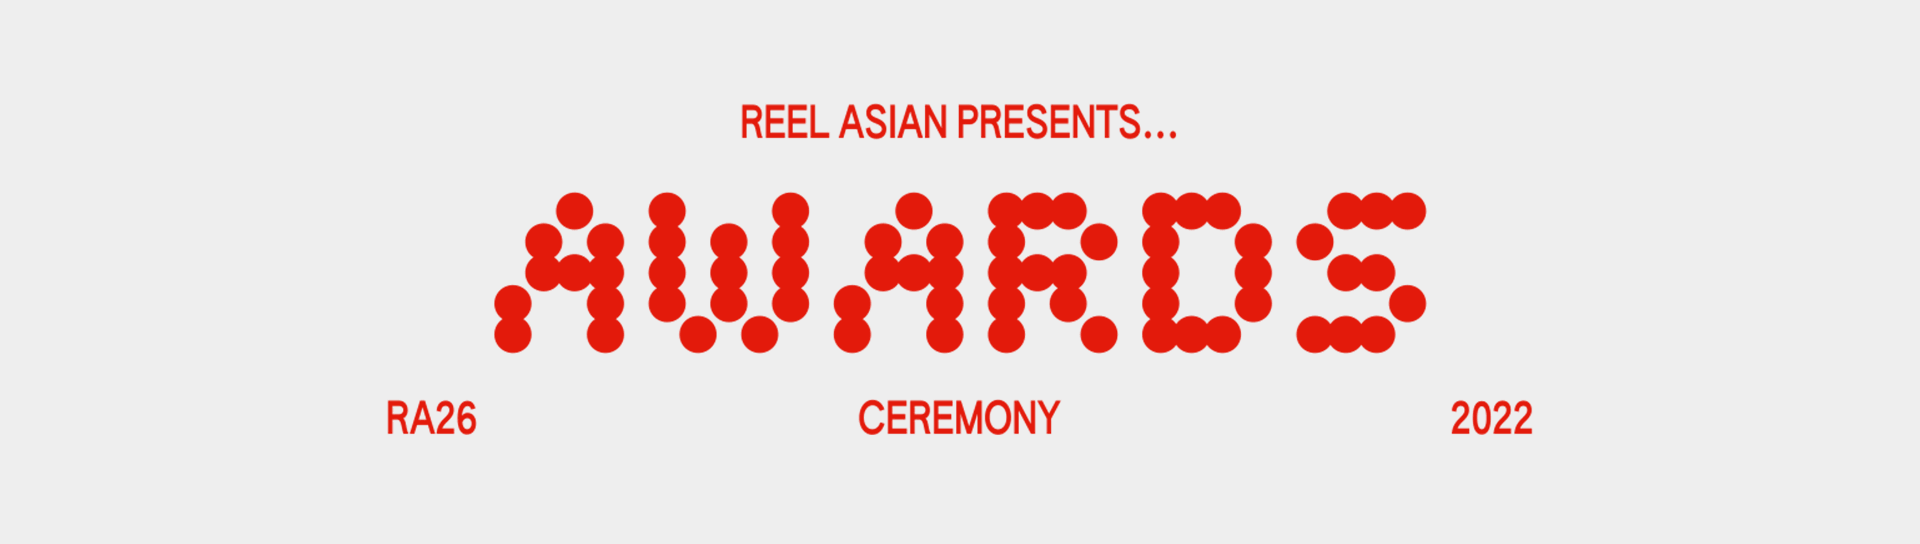 Reel Asian Awards Ceremony Opening Typography GIF